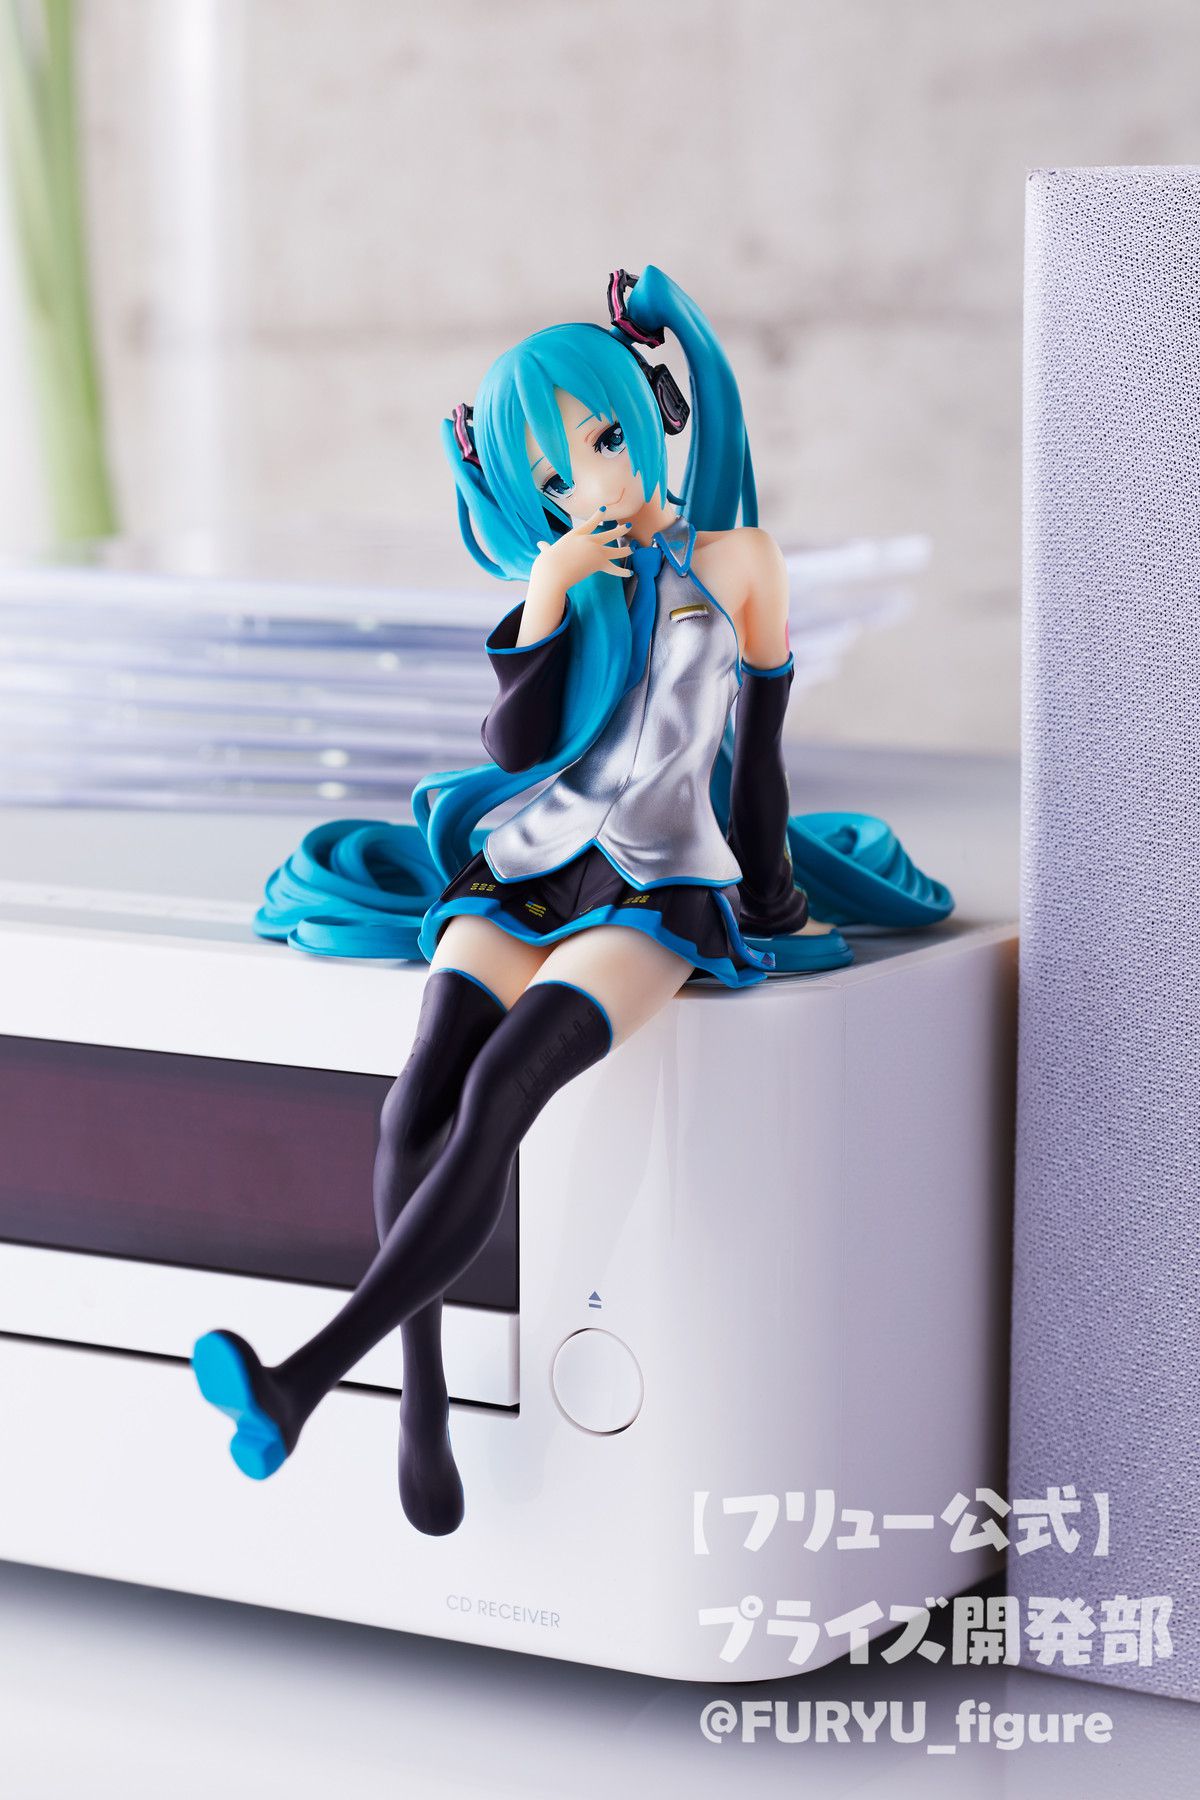 [Hatsune Miku] Nuyoru Stopper Figure, too much color and become a topic erotic 5